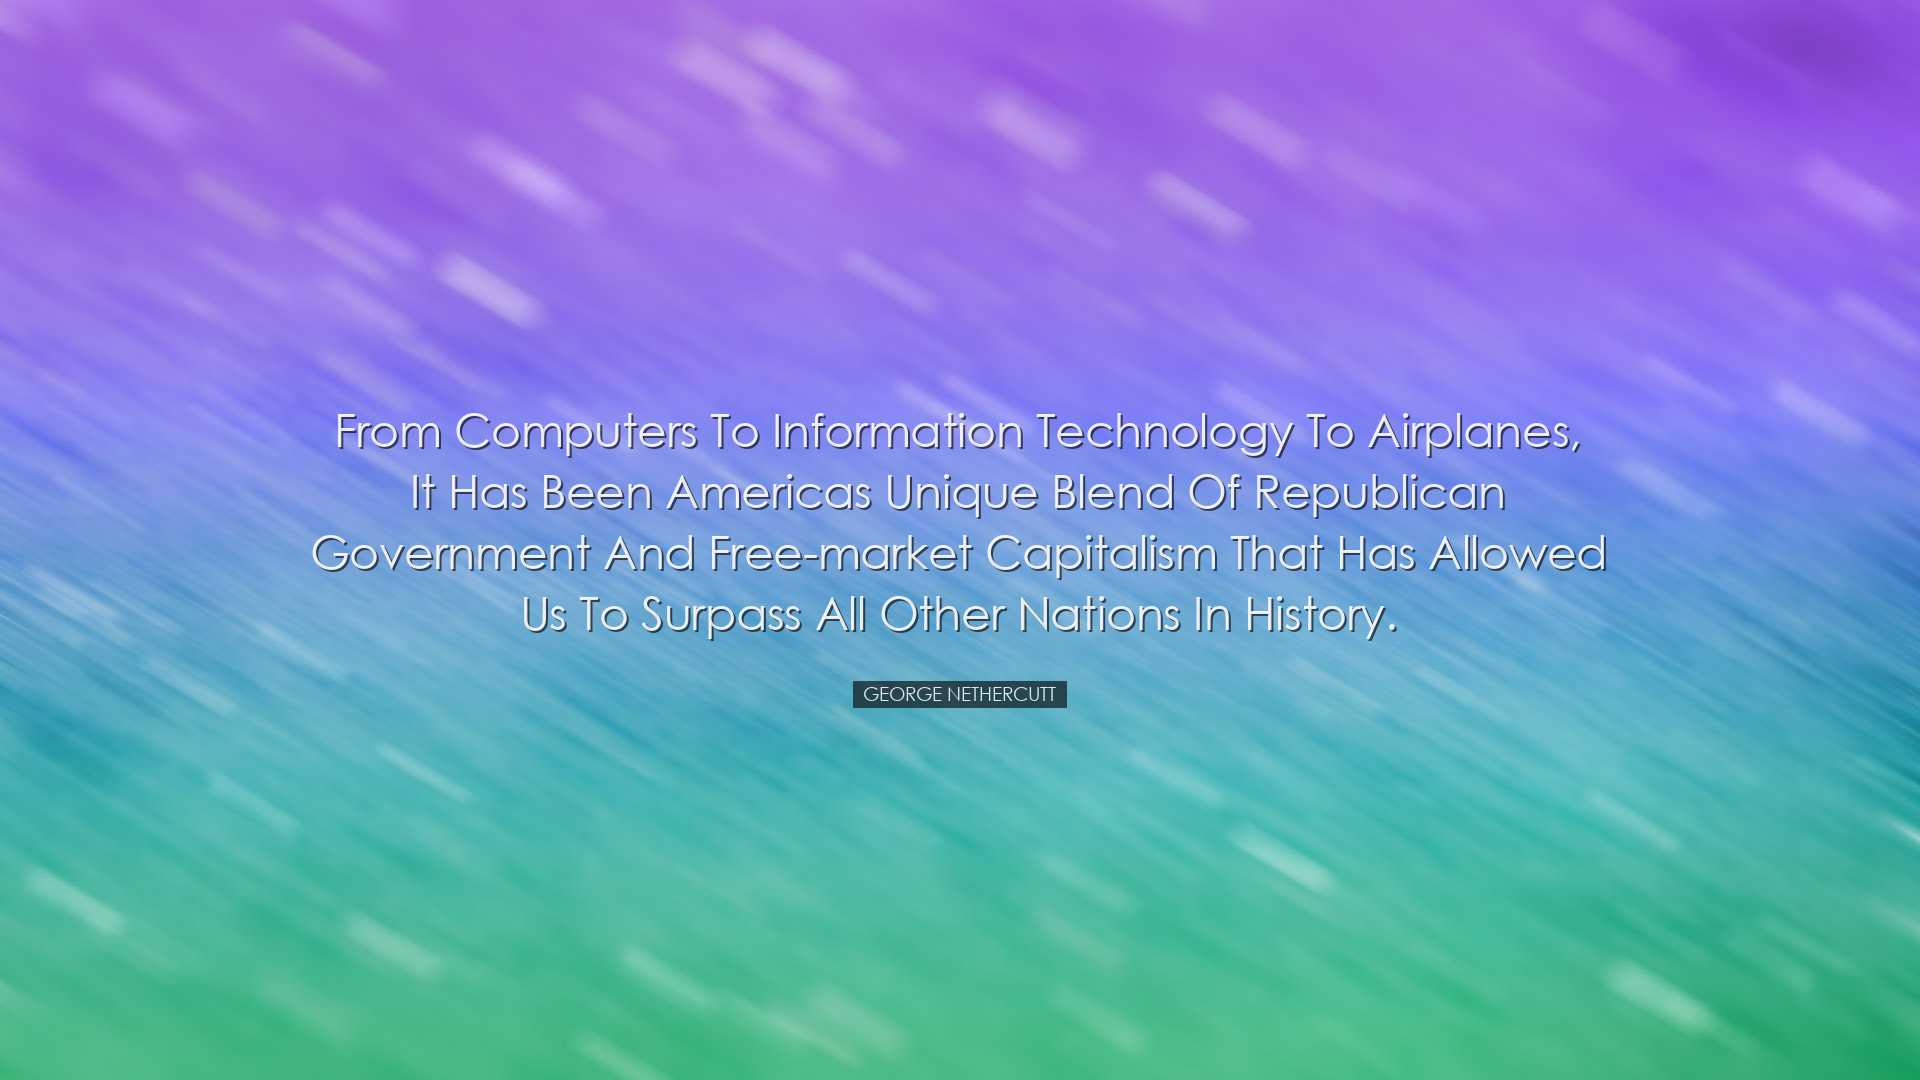 From computers to information technology to airplanes, it has been